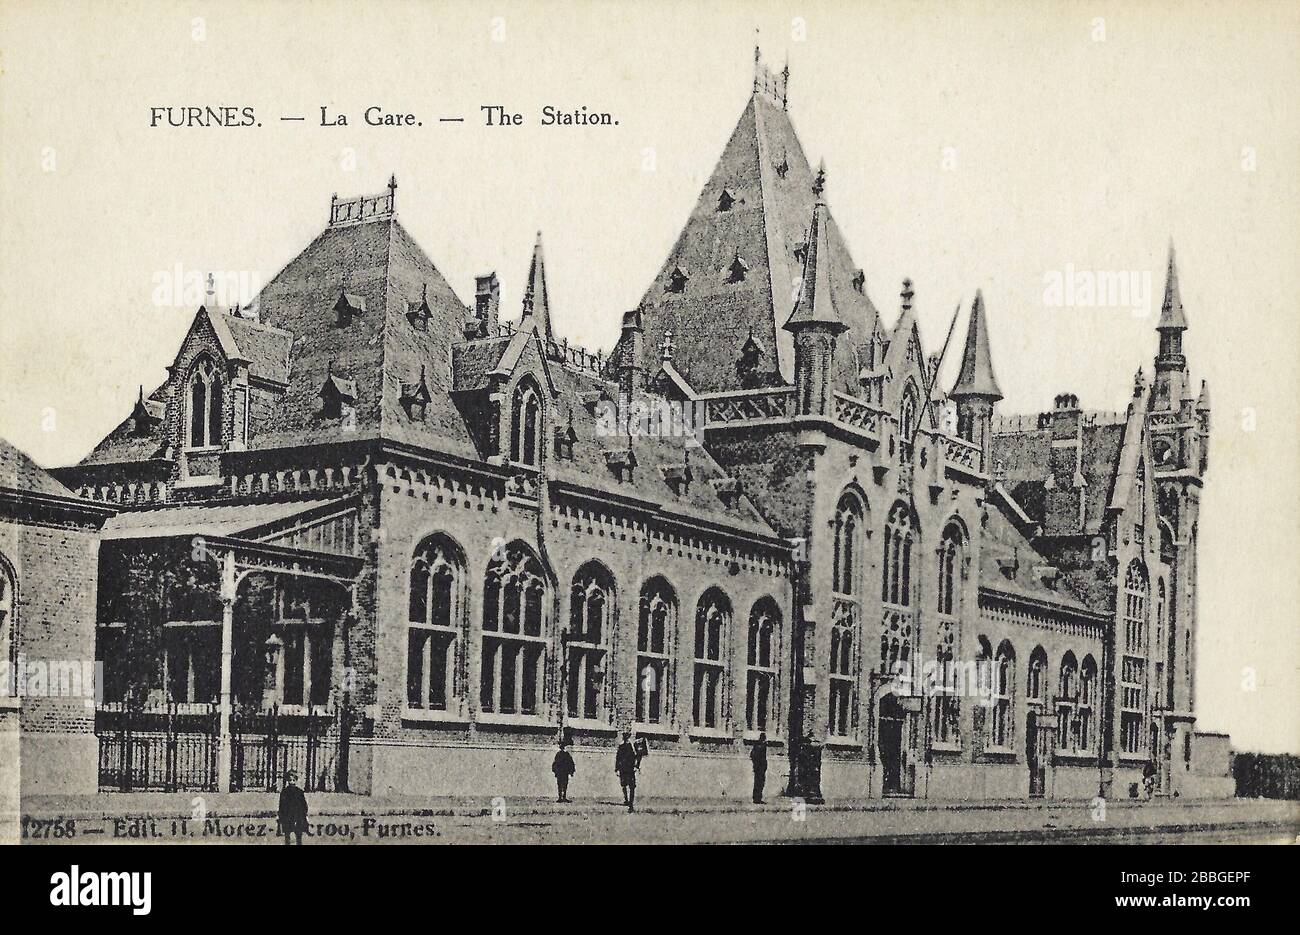 Vintage postcard showing the railway station La Gare of Veurne (Furnes in French) in the early 20th century, Veurne is a city in northwestern Belgium, Stock Photo